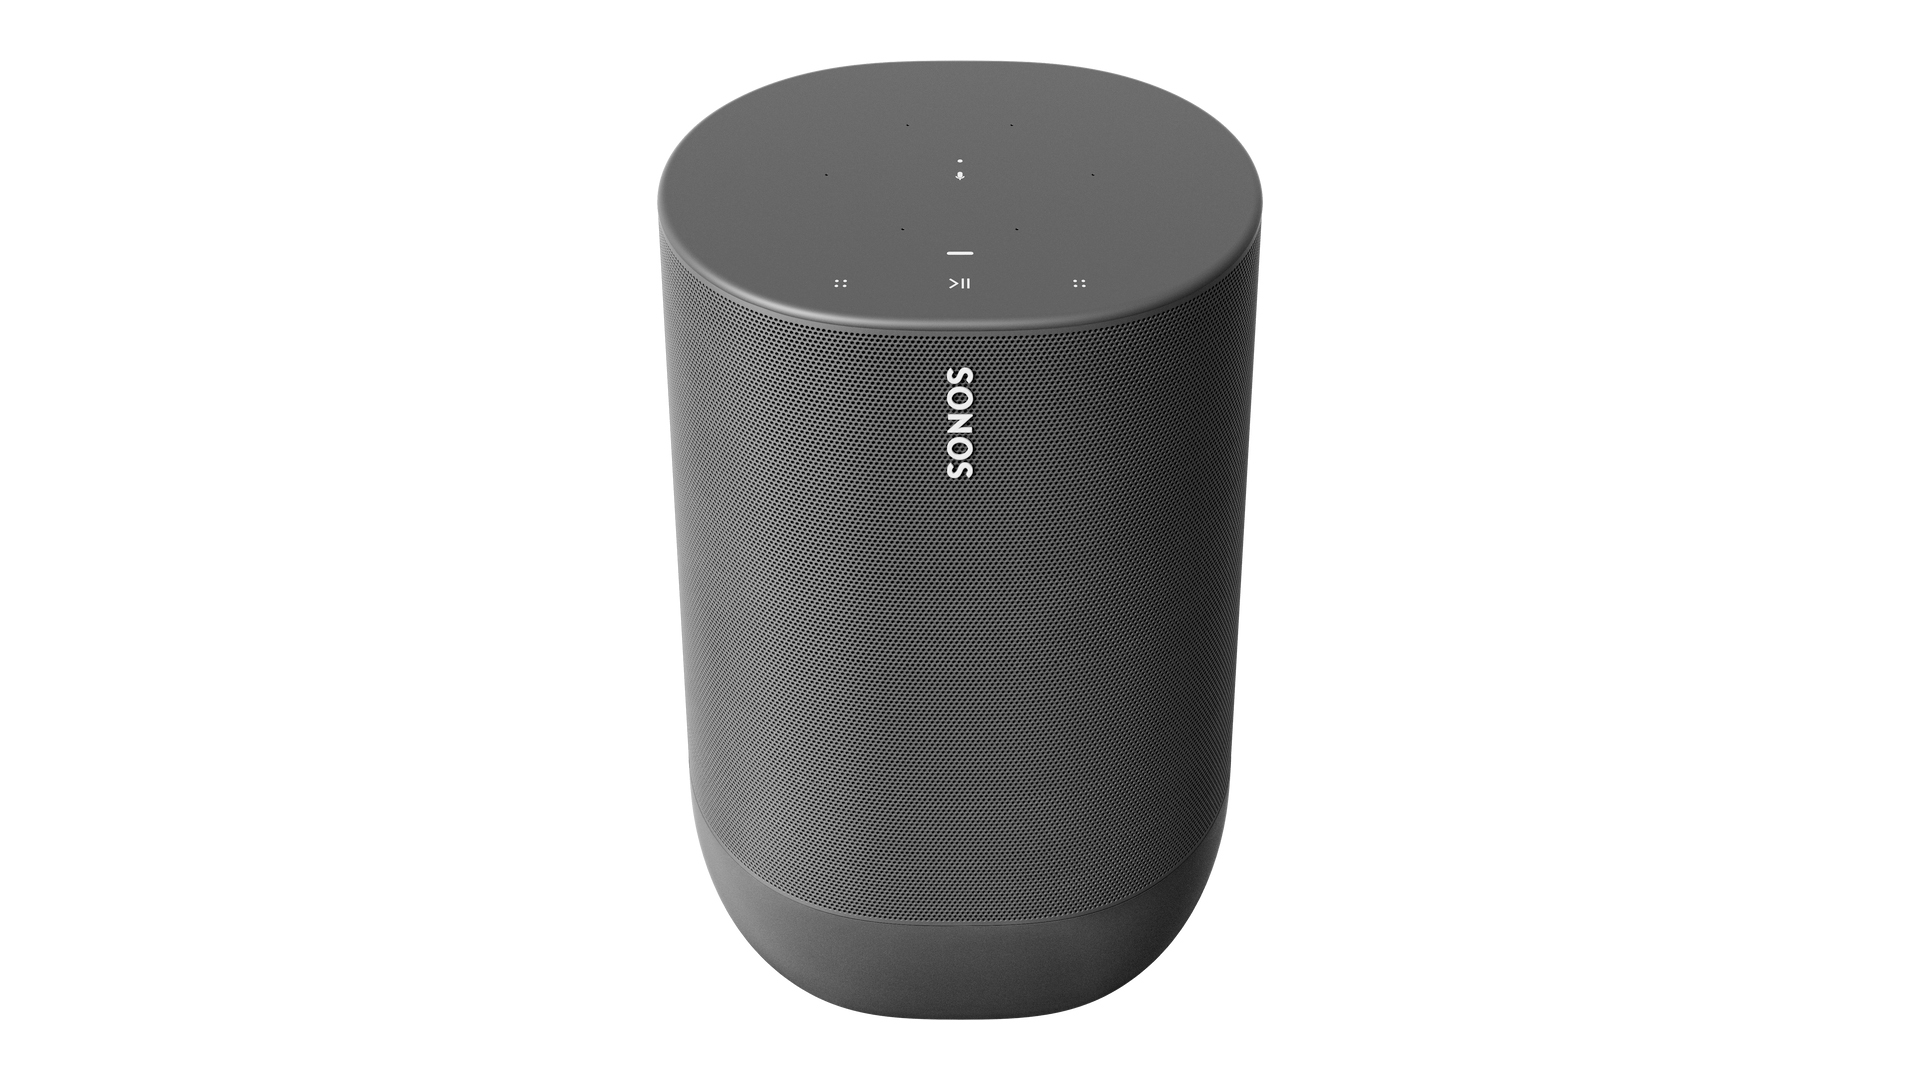 A Sonos Move smart speaker in grey against a white background.